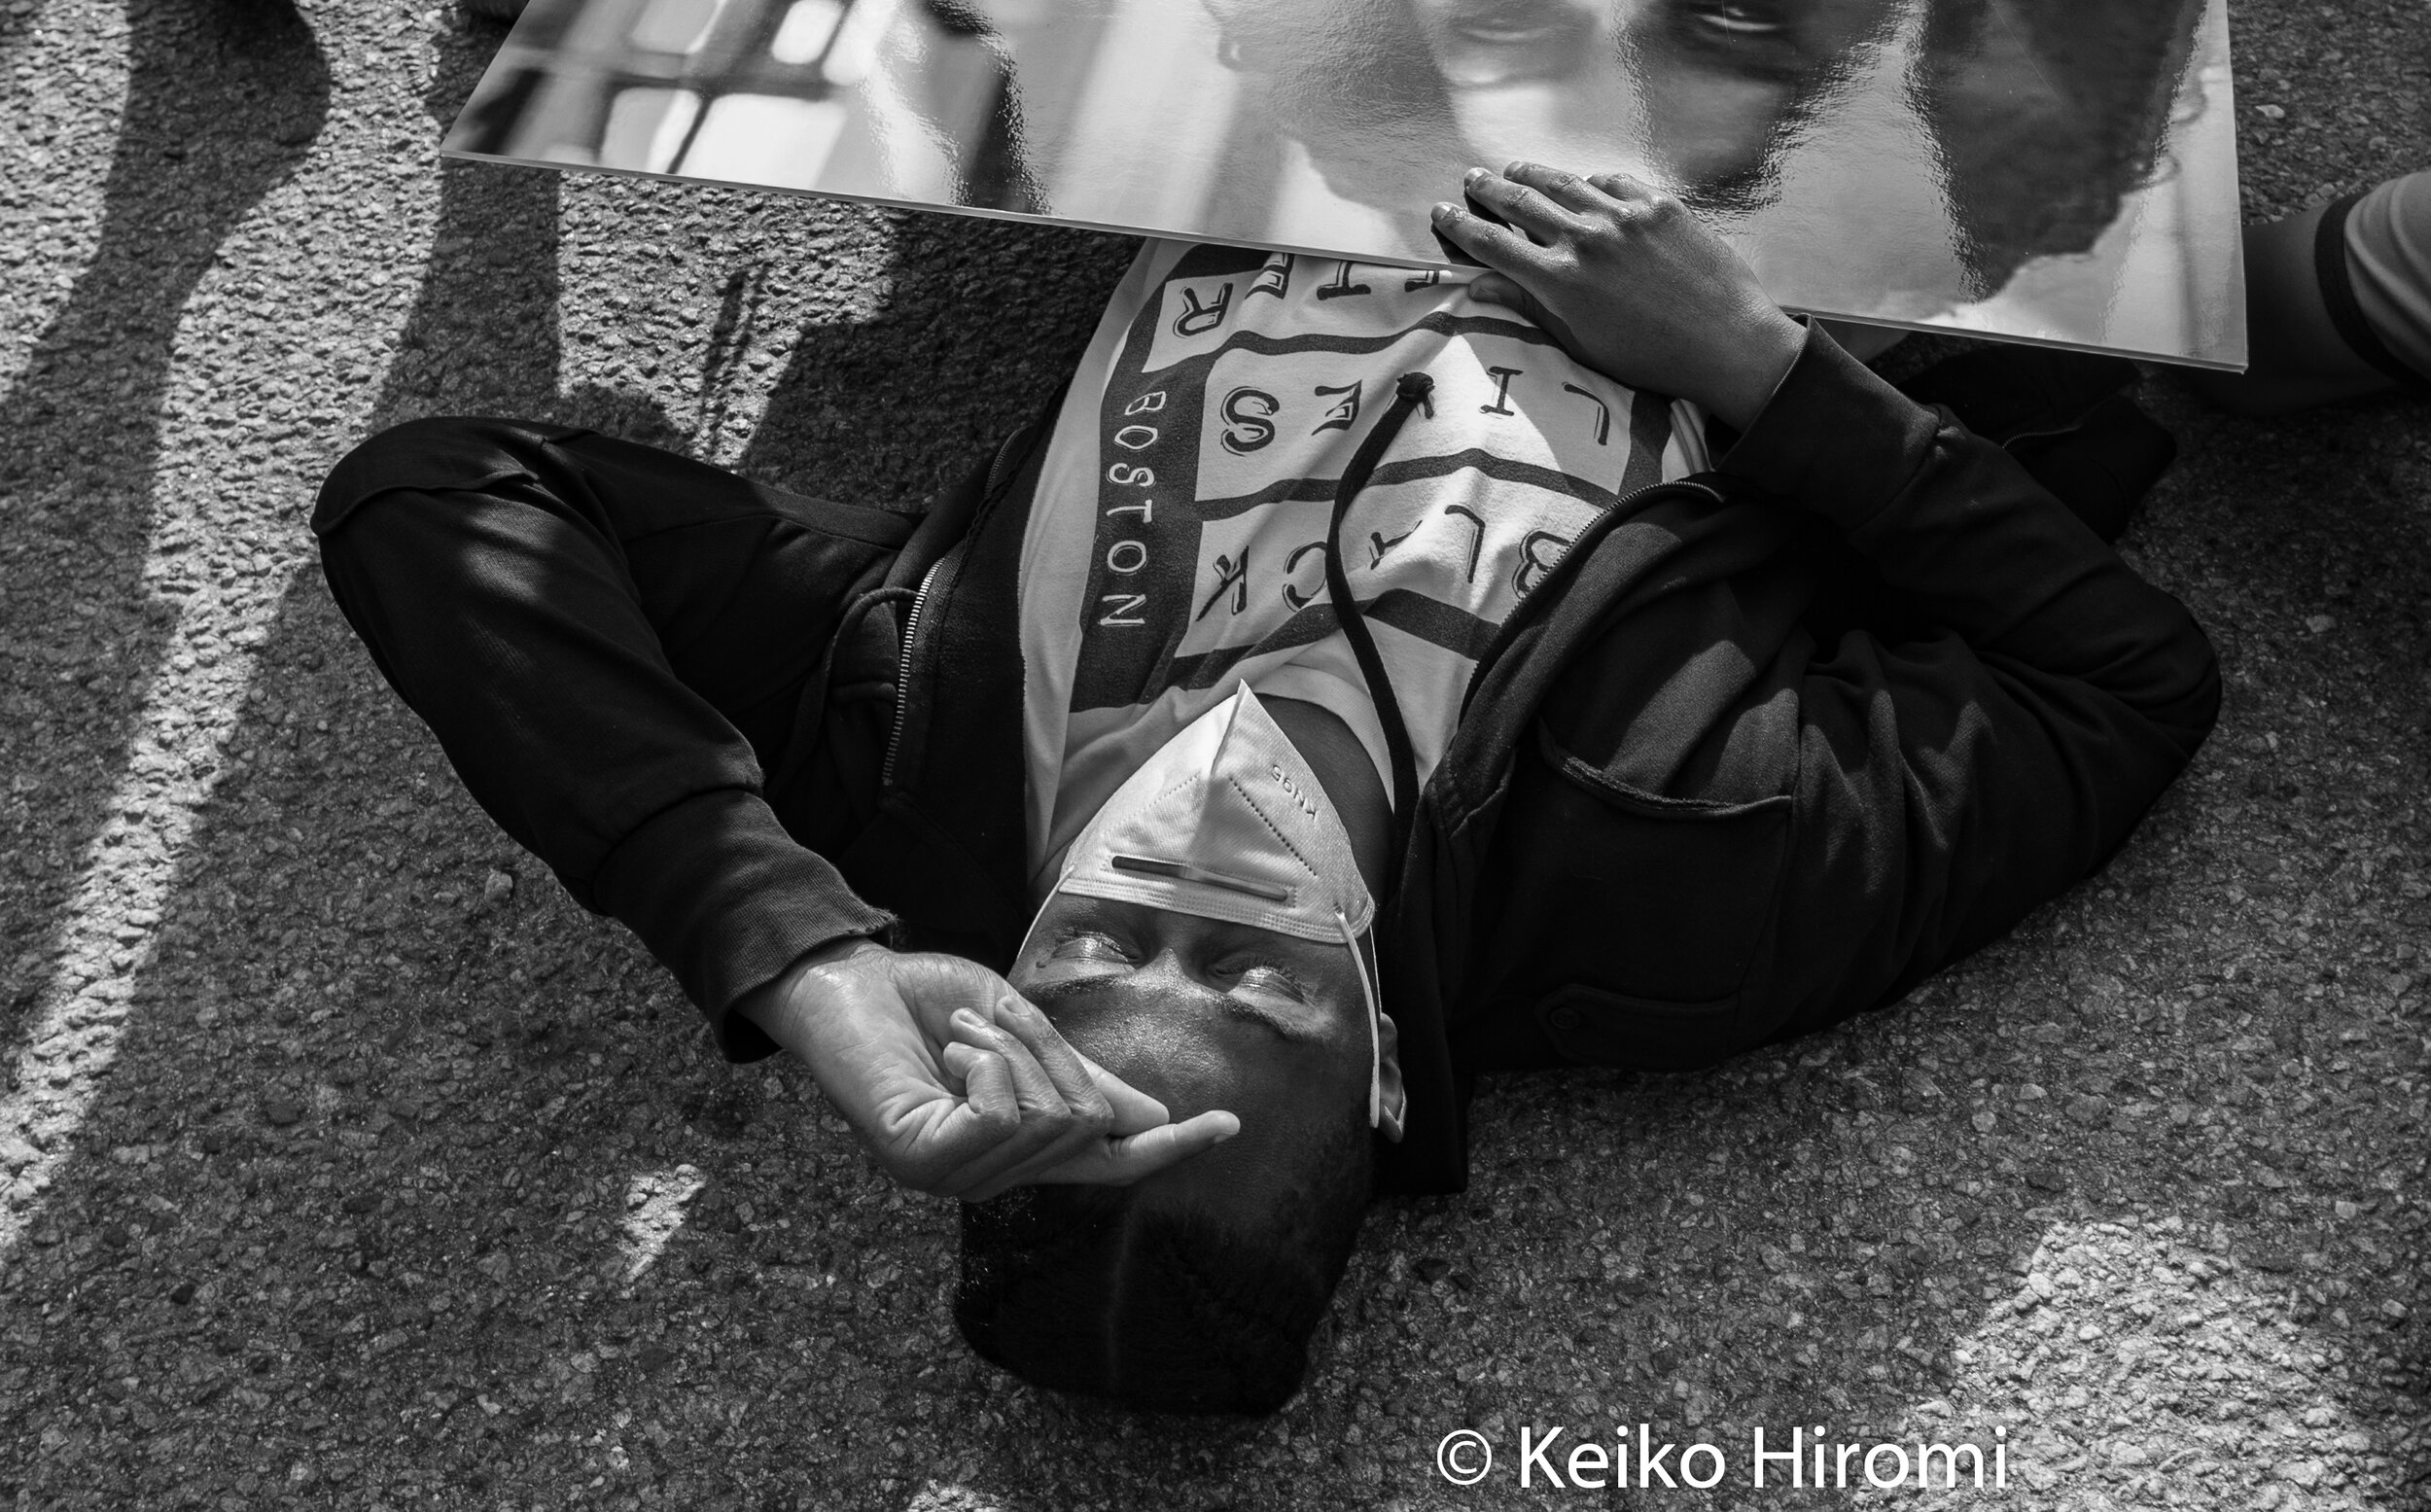  June 2, 2020, Boston, Massachusetts, USA: A protester stages "die in" protest during a rally in response to deaths of George Floyd and against police brutality and racism at Franklin Park in Boston. 